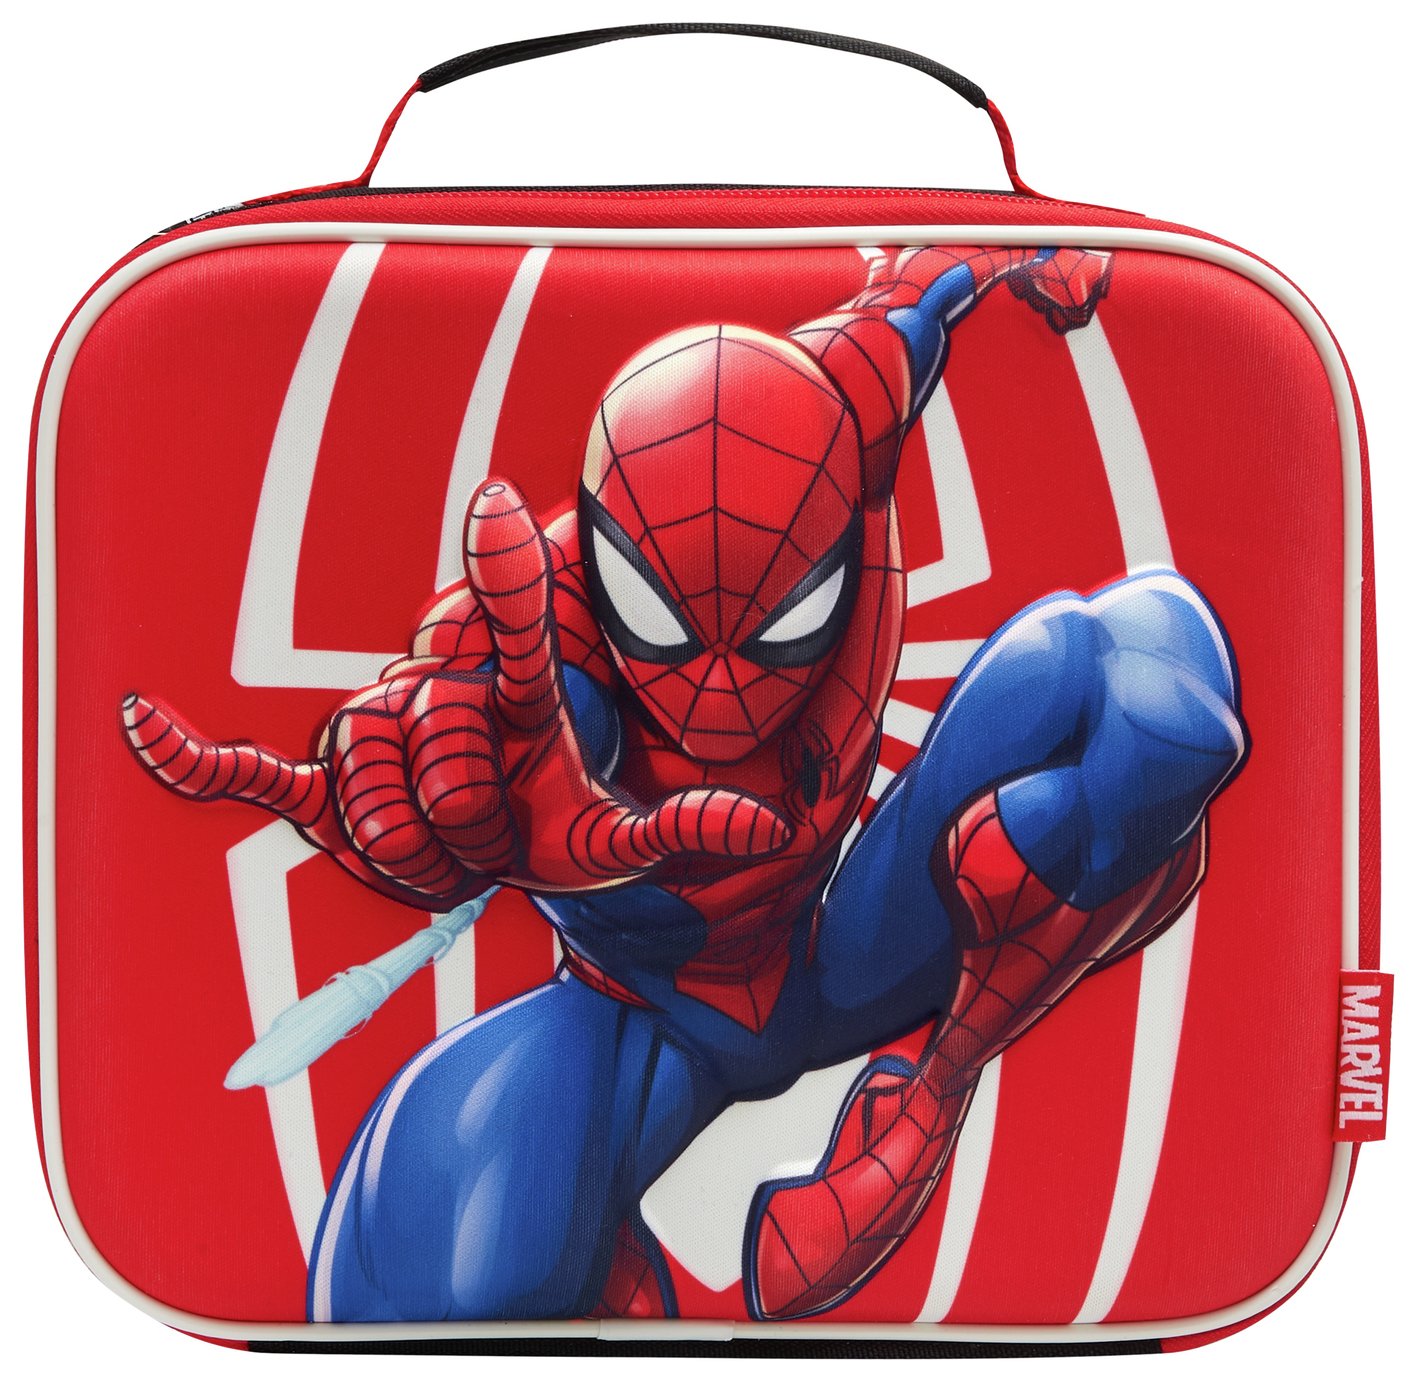 Spider-Man Lunch Bag - Red